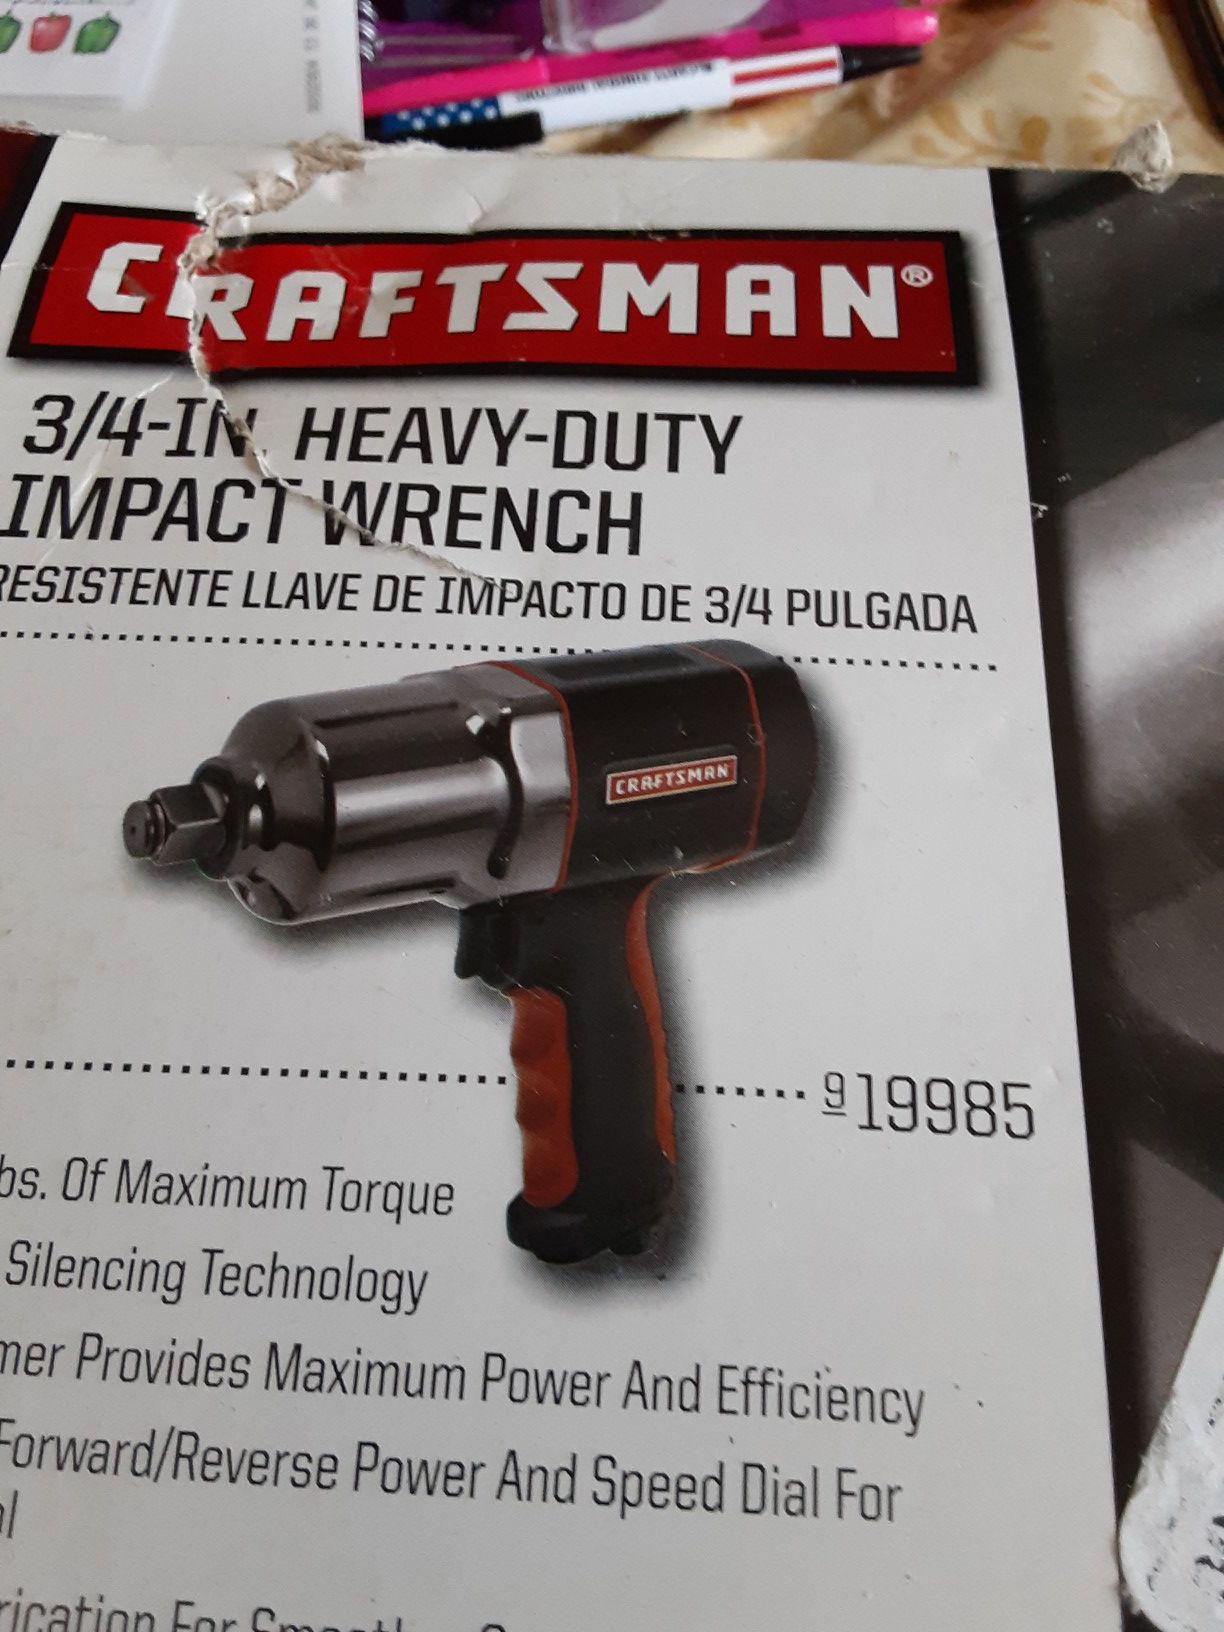 Craftsman 3/4 in. Heavy Duty impact wrench